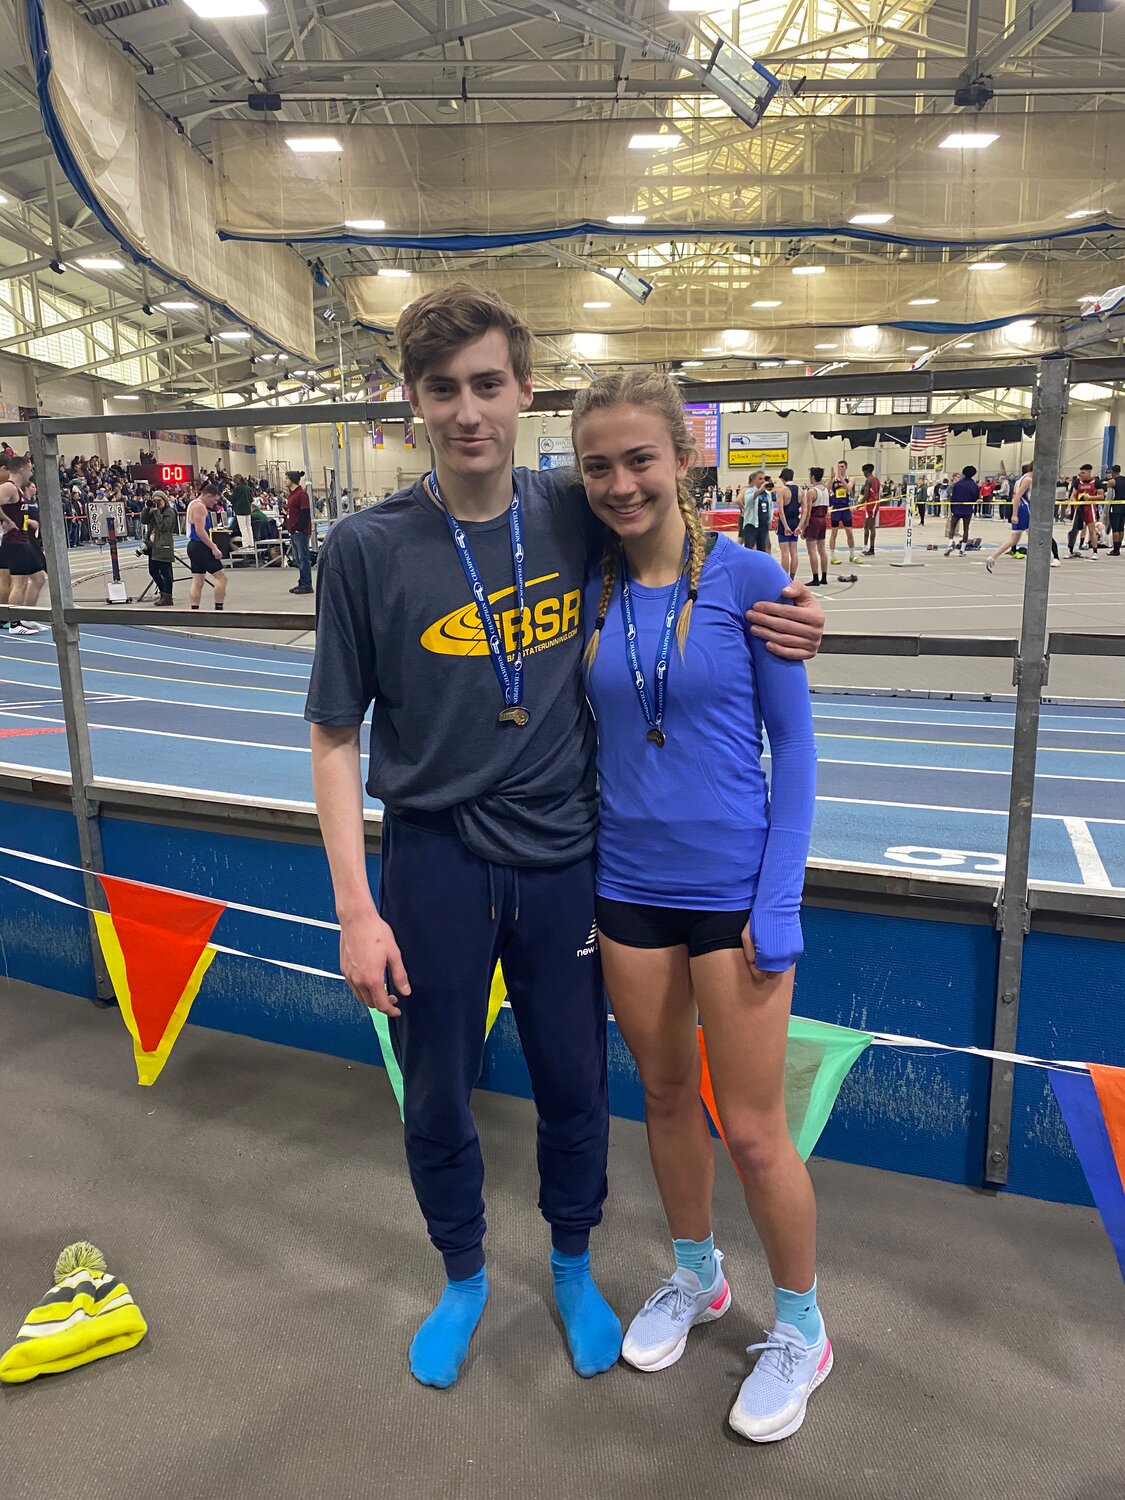 Will Kenney and Mia Cromwell moved on to the State Meet on Saturday, February 22, at the Reggie Lewis Center in Boston. 